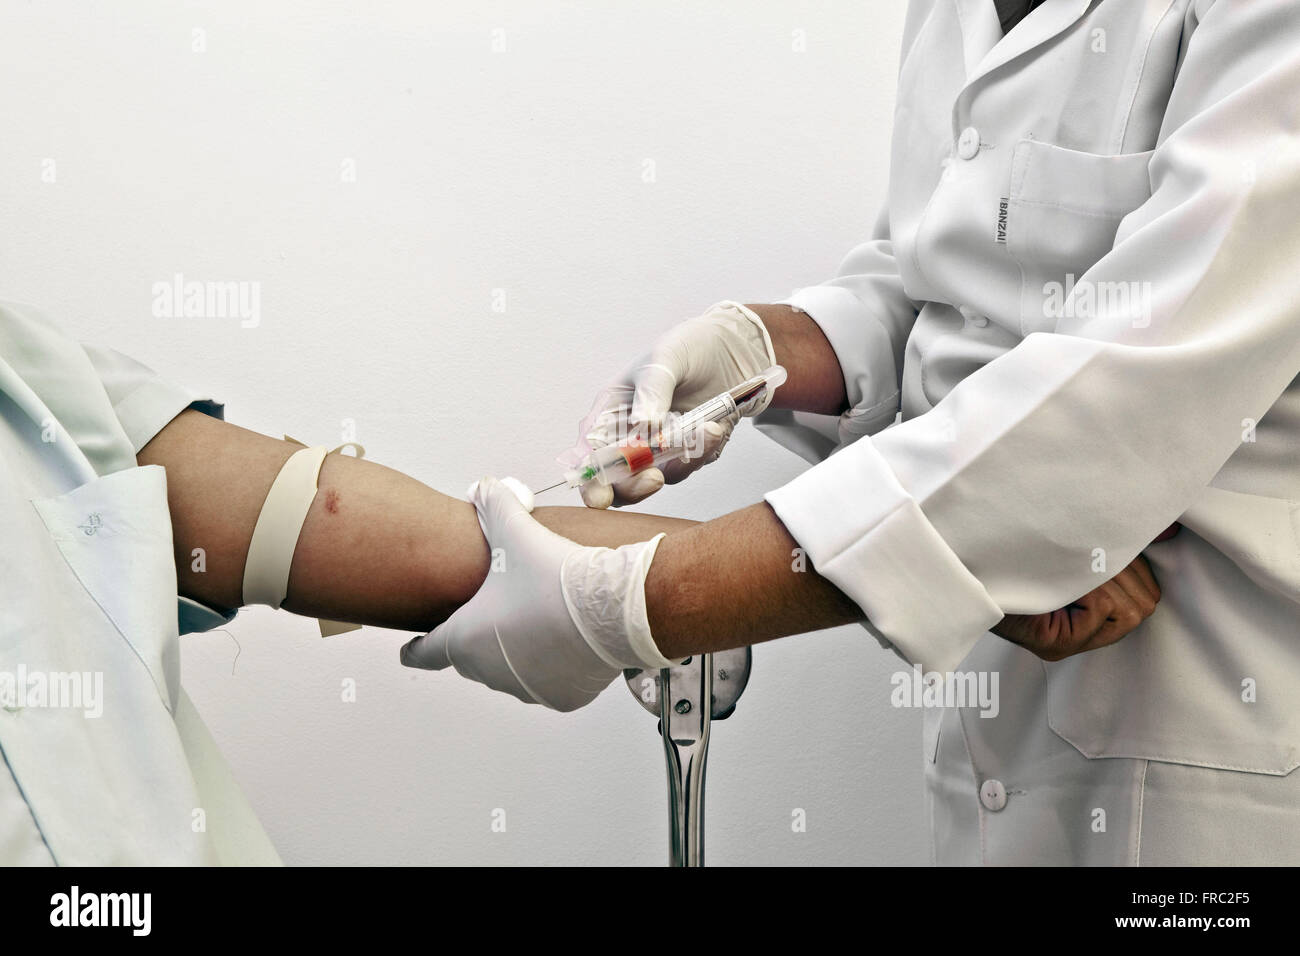 Nurse collecting blood from patient Stock Photo